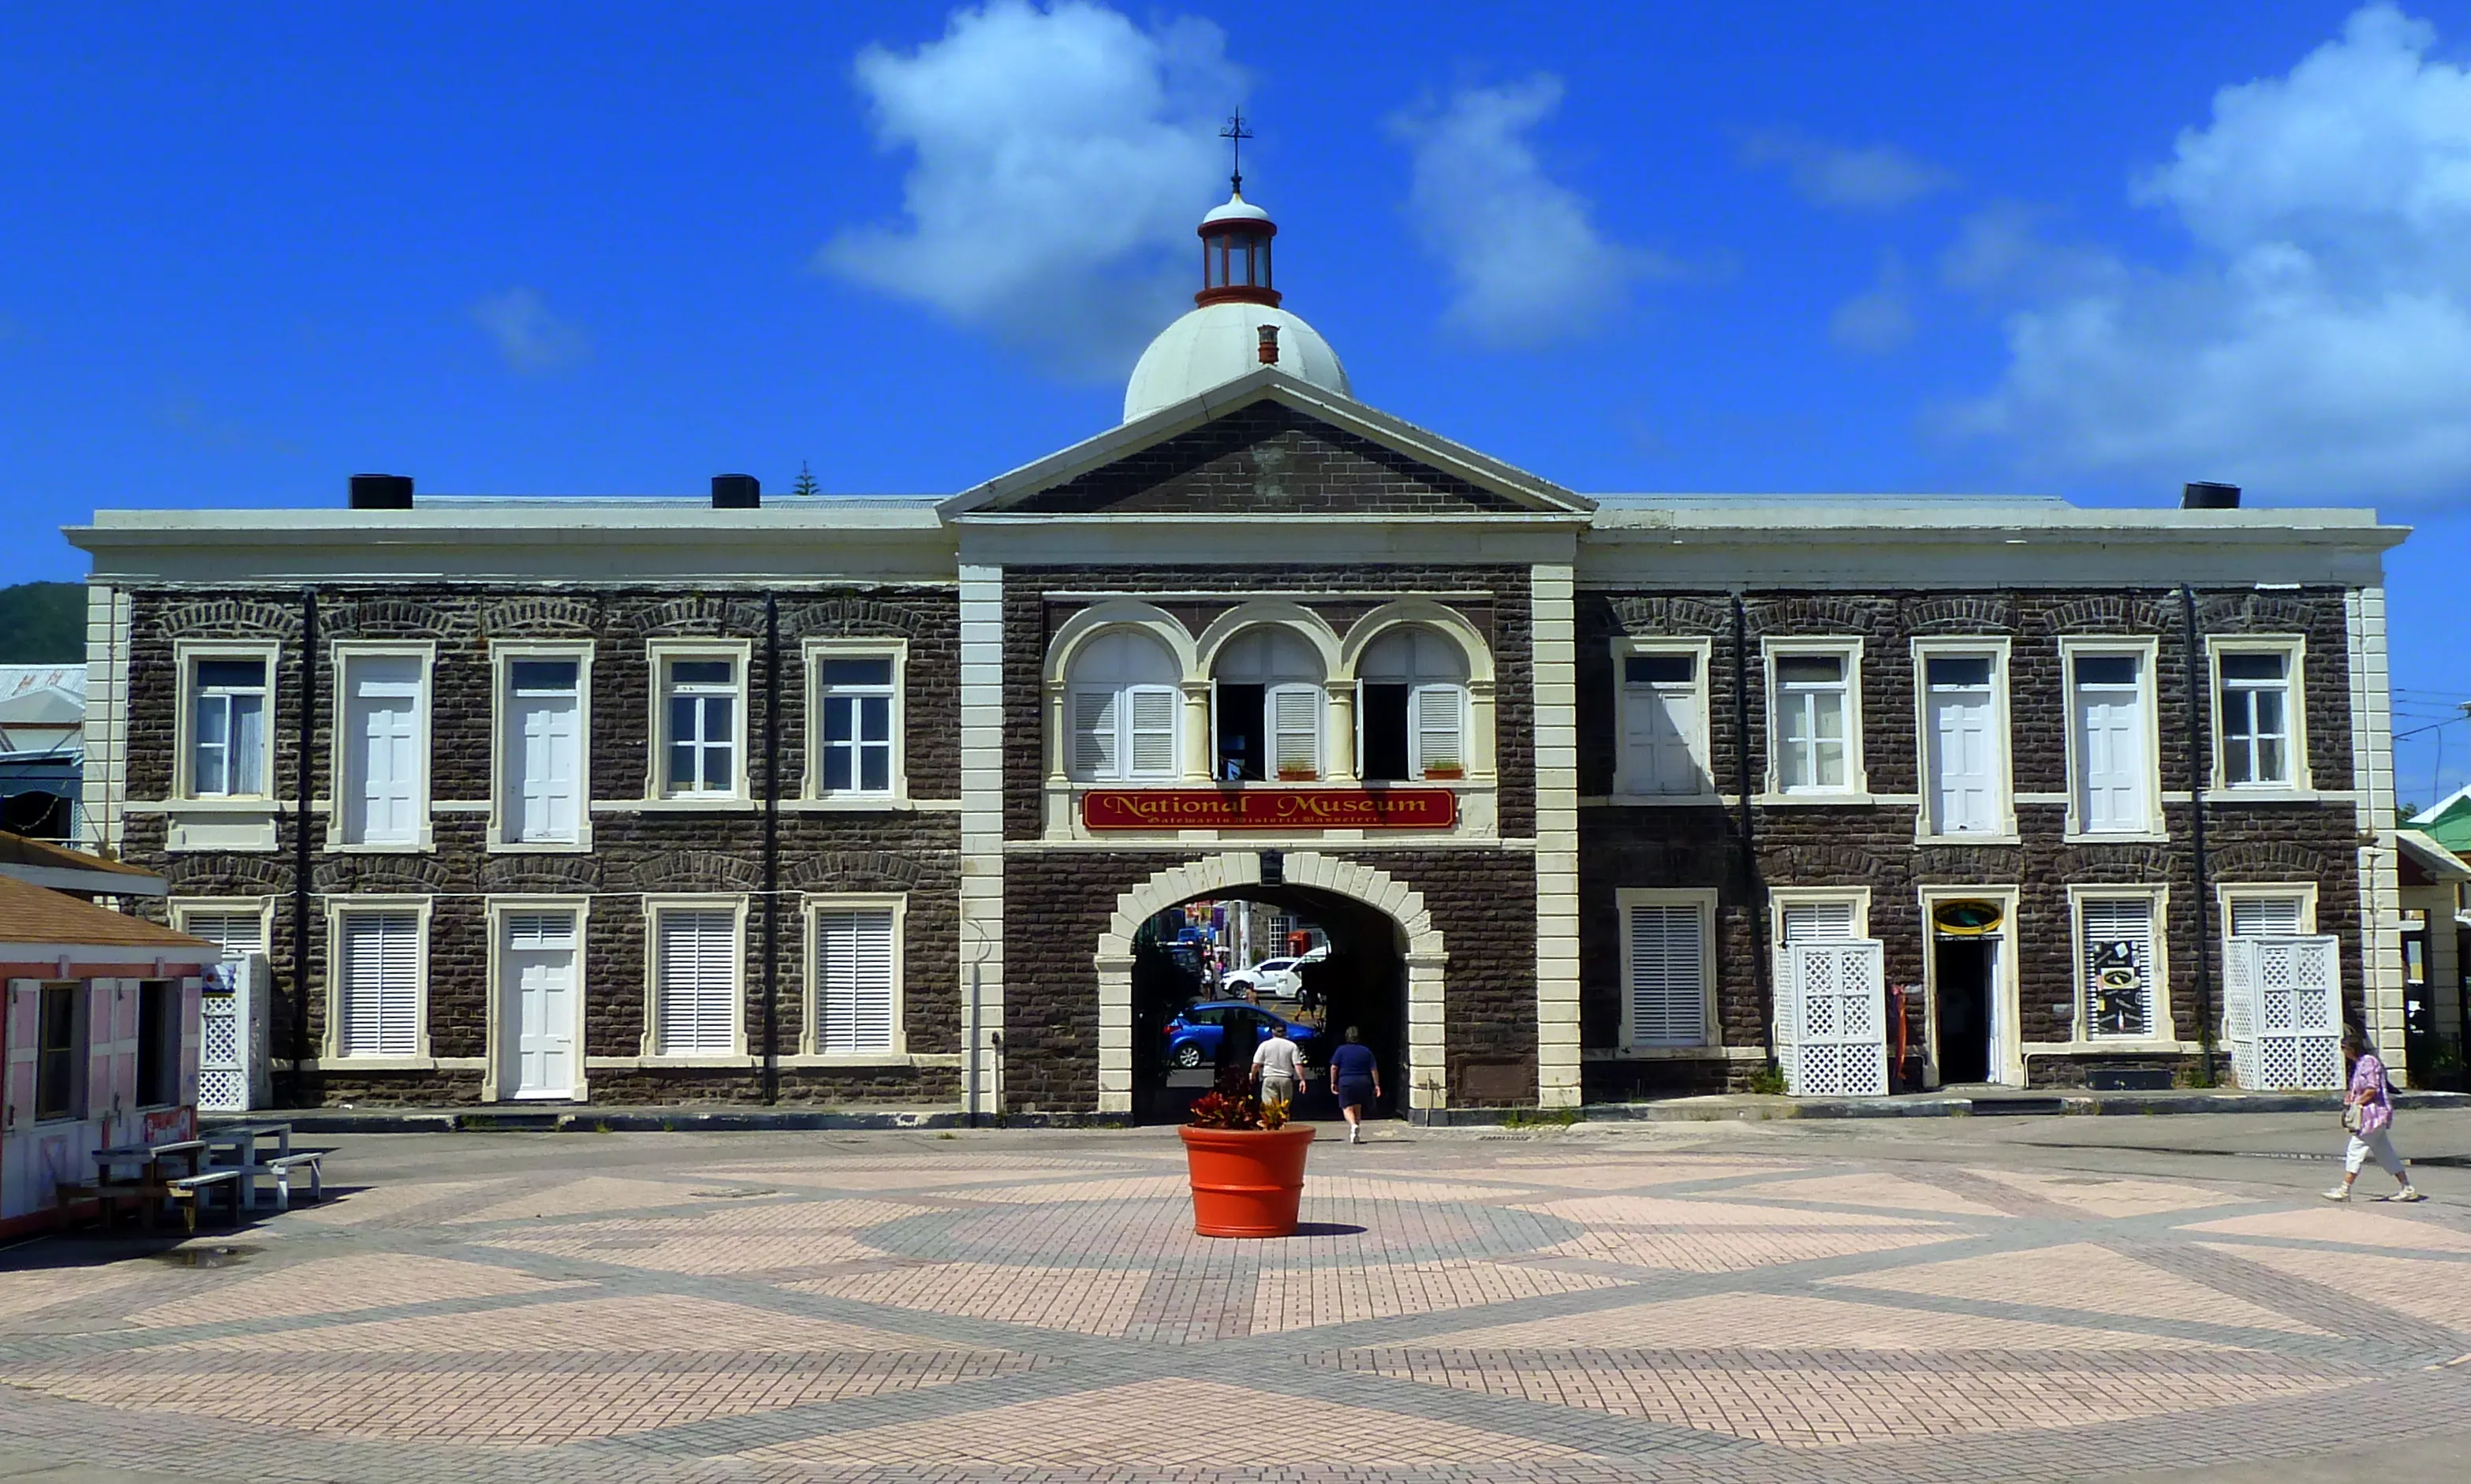 The National Museum of St. Kitts in Saint Kitts and Nevis, Caribbean | Museums - Rated 0.8